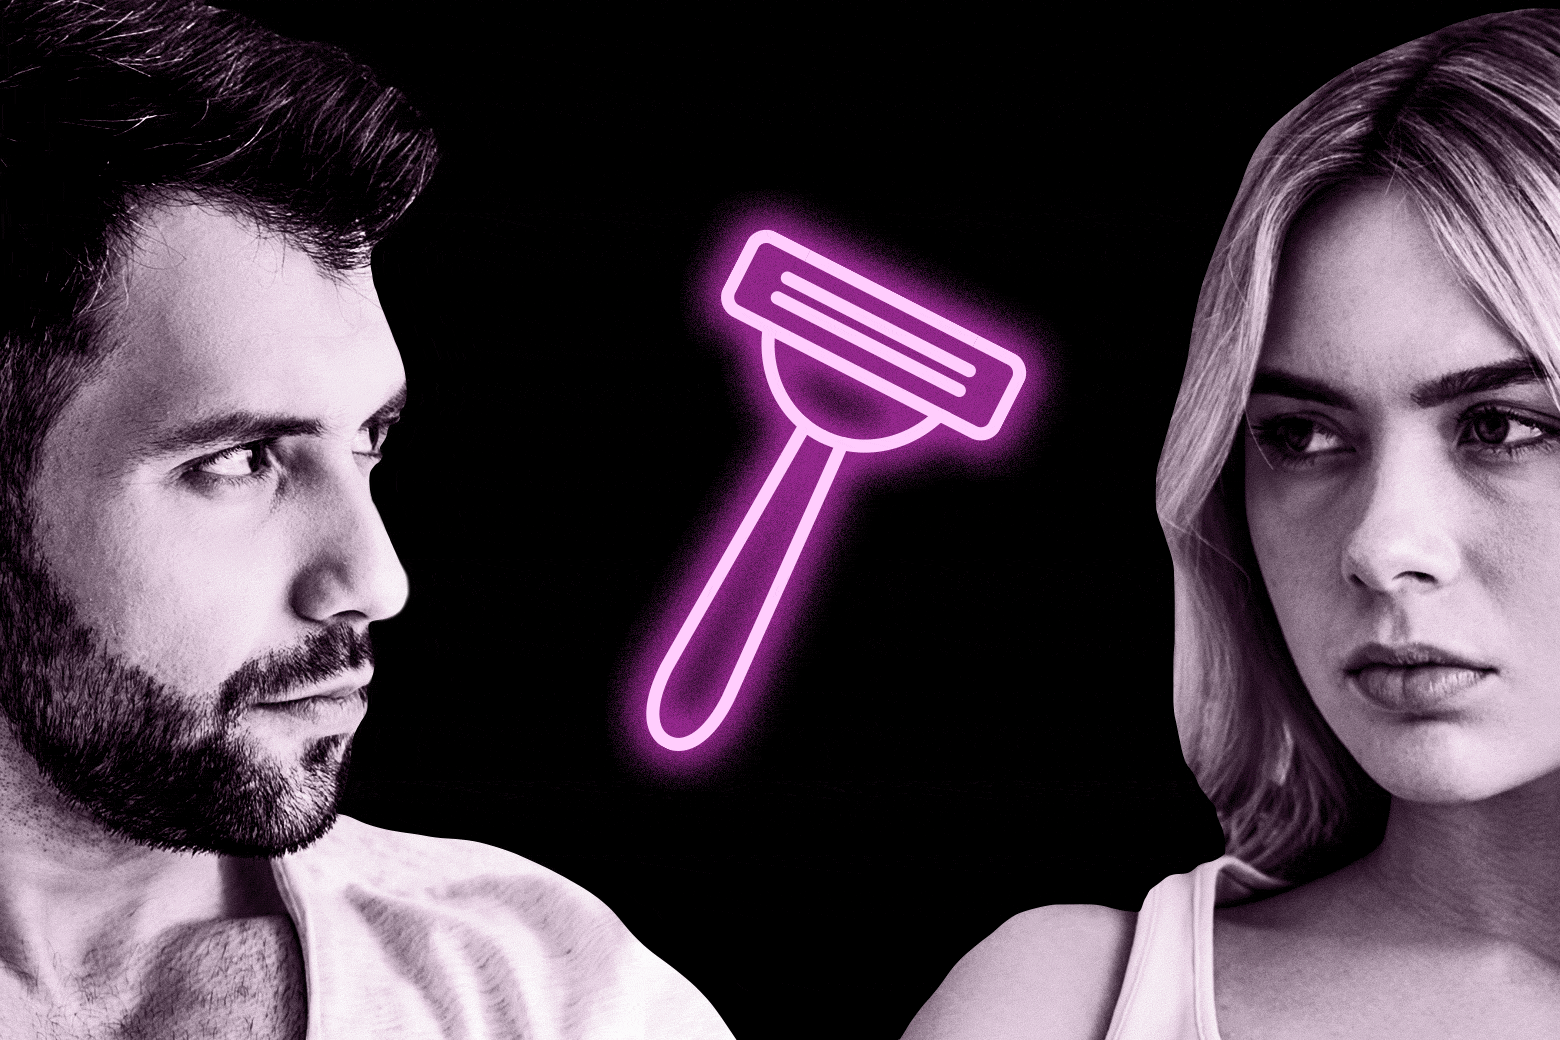 My girlfriend stopped shaving her armpits, so I want to stop shaving my pubic hair